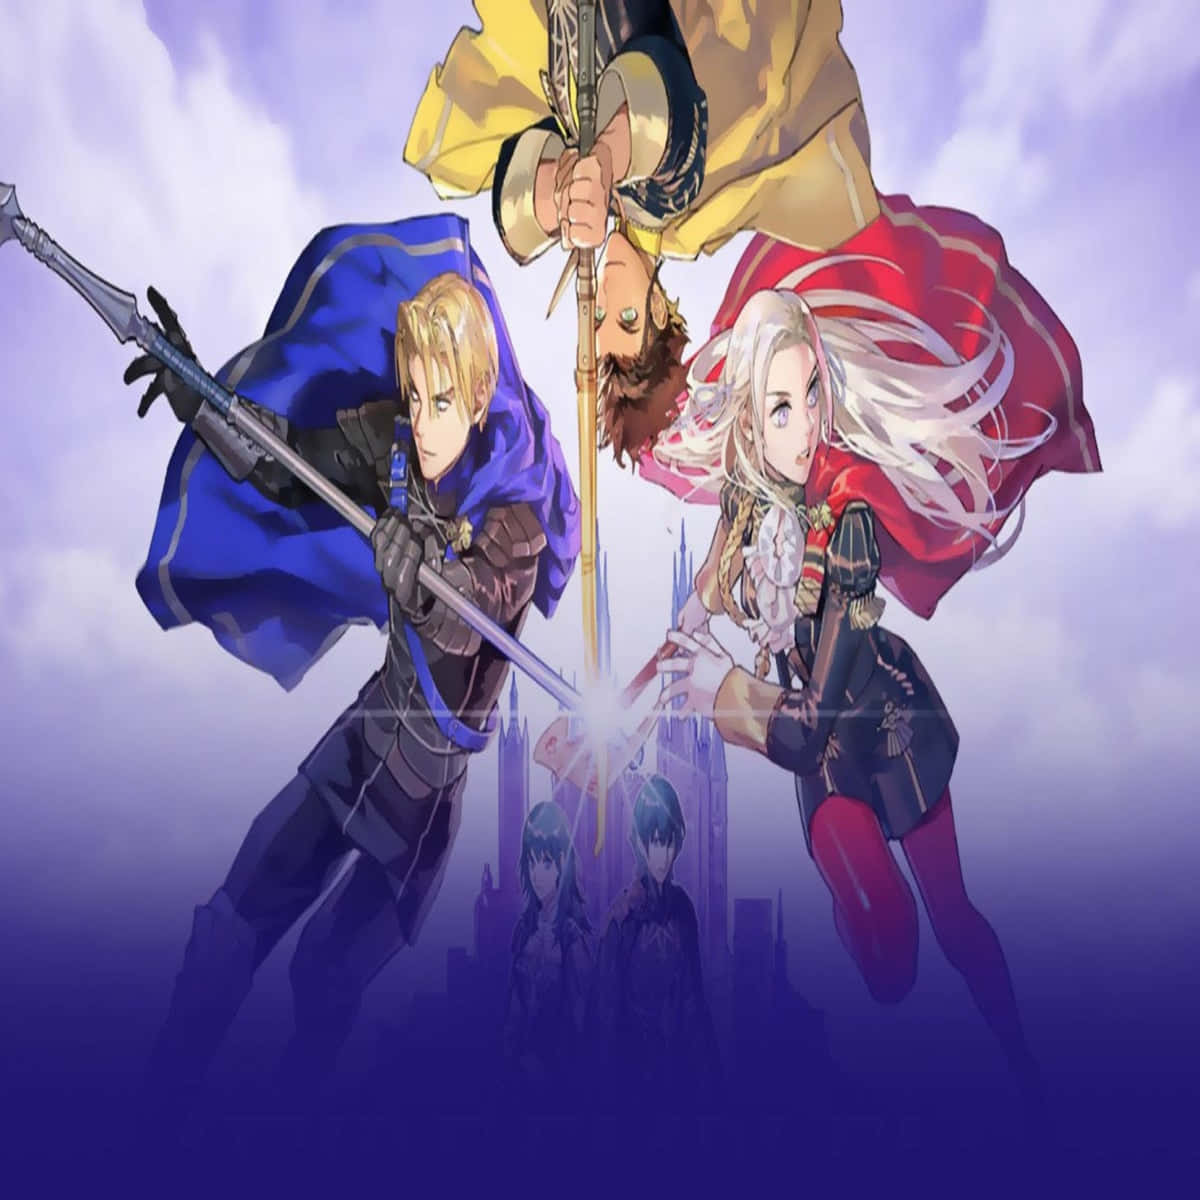 Discover a new twist on the Fire Emblem Three Houses story.